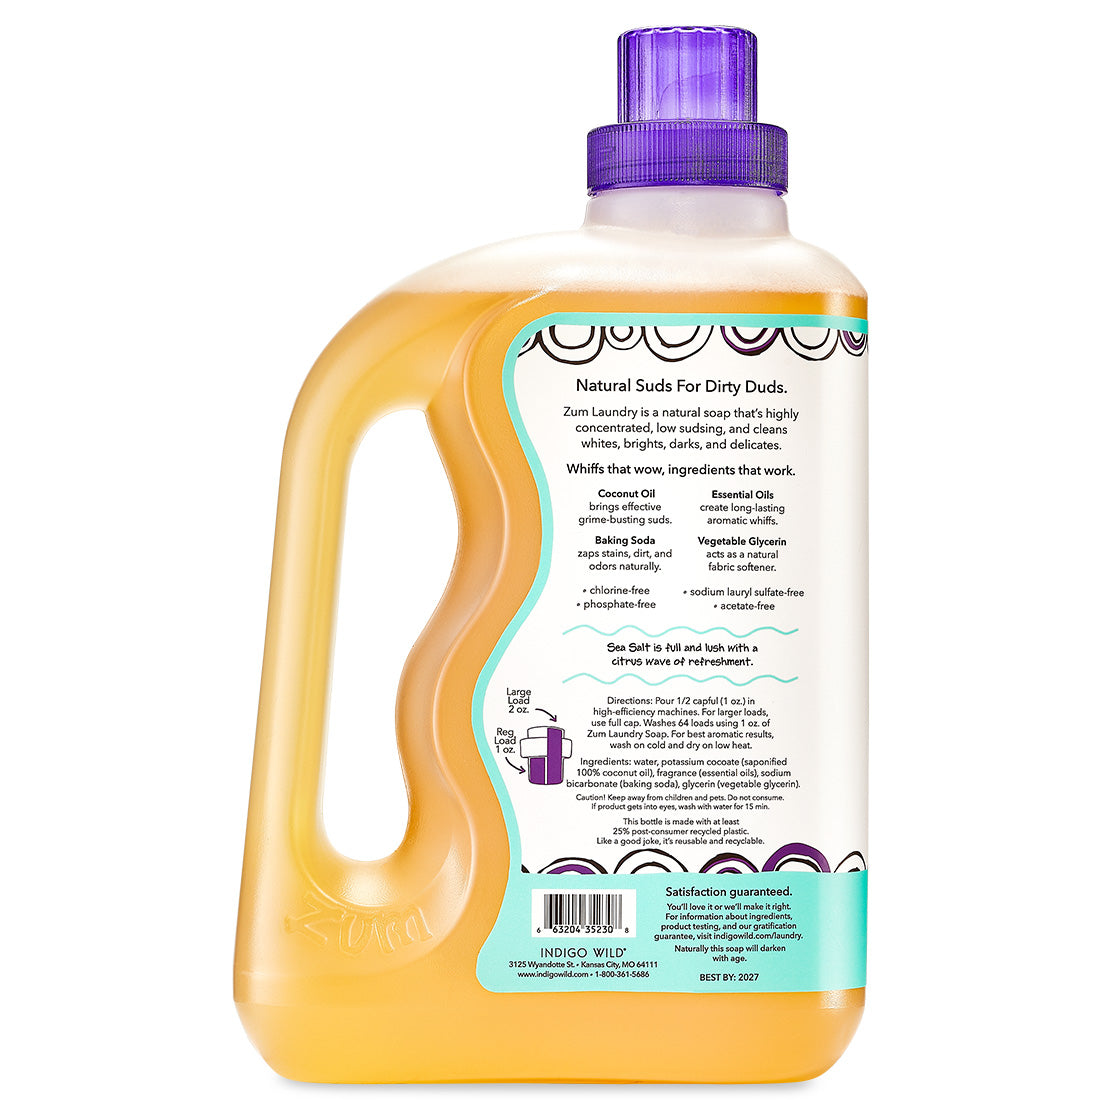 Back view of large bottle with handle and screw cap containing Sea Salt Zum Laundry Soap